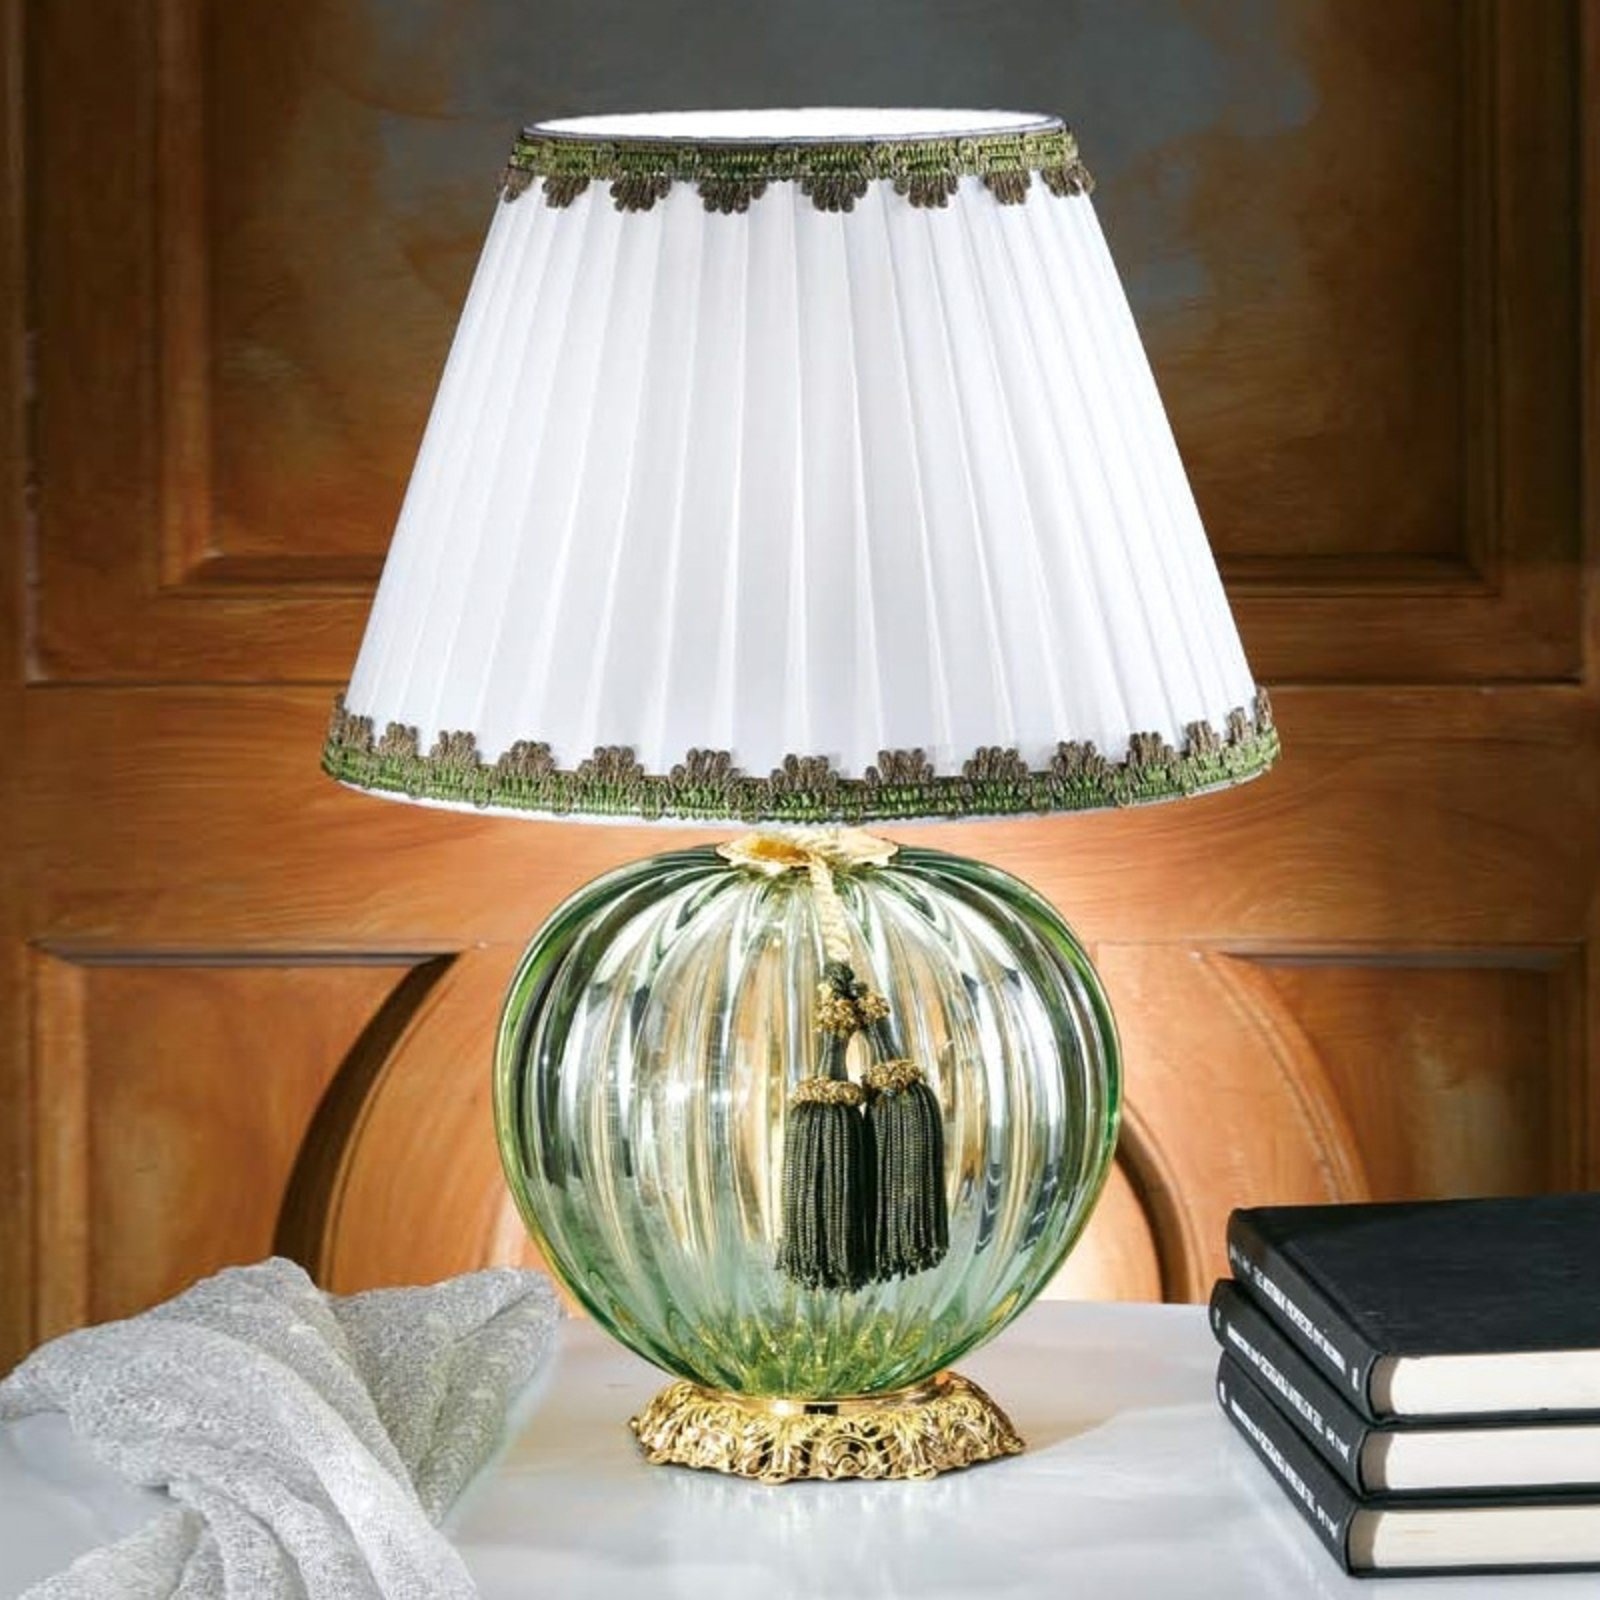 Maureen handsome table lamp with Murano glass